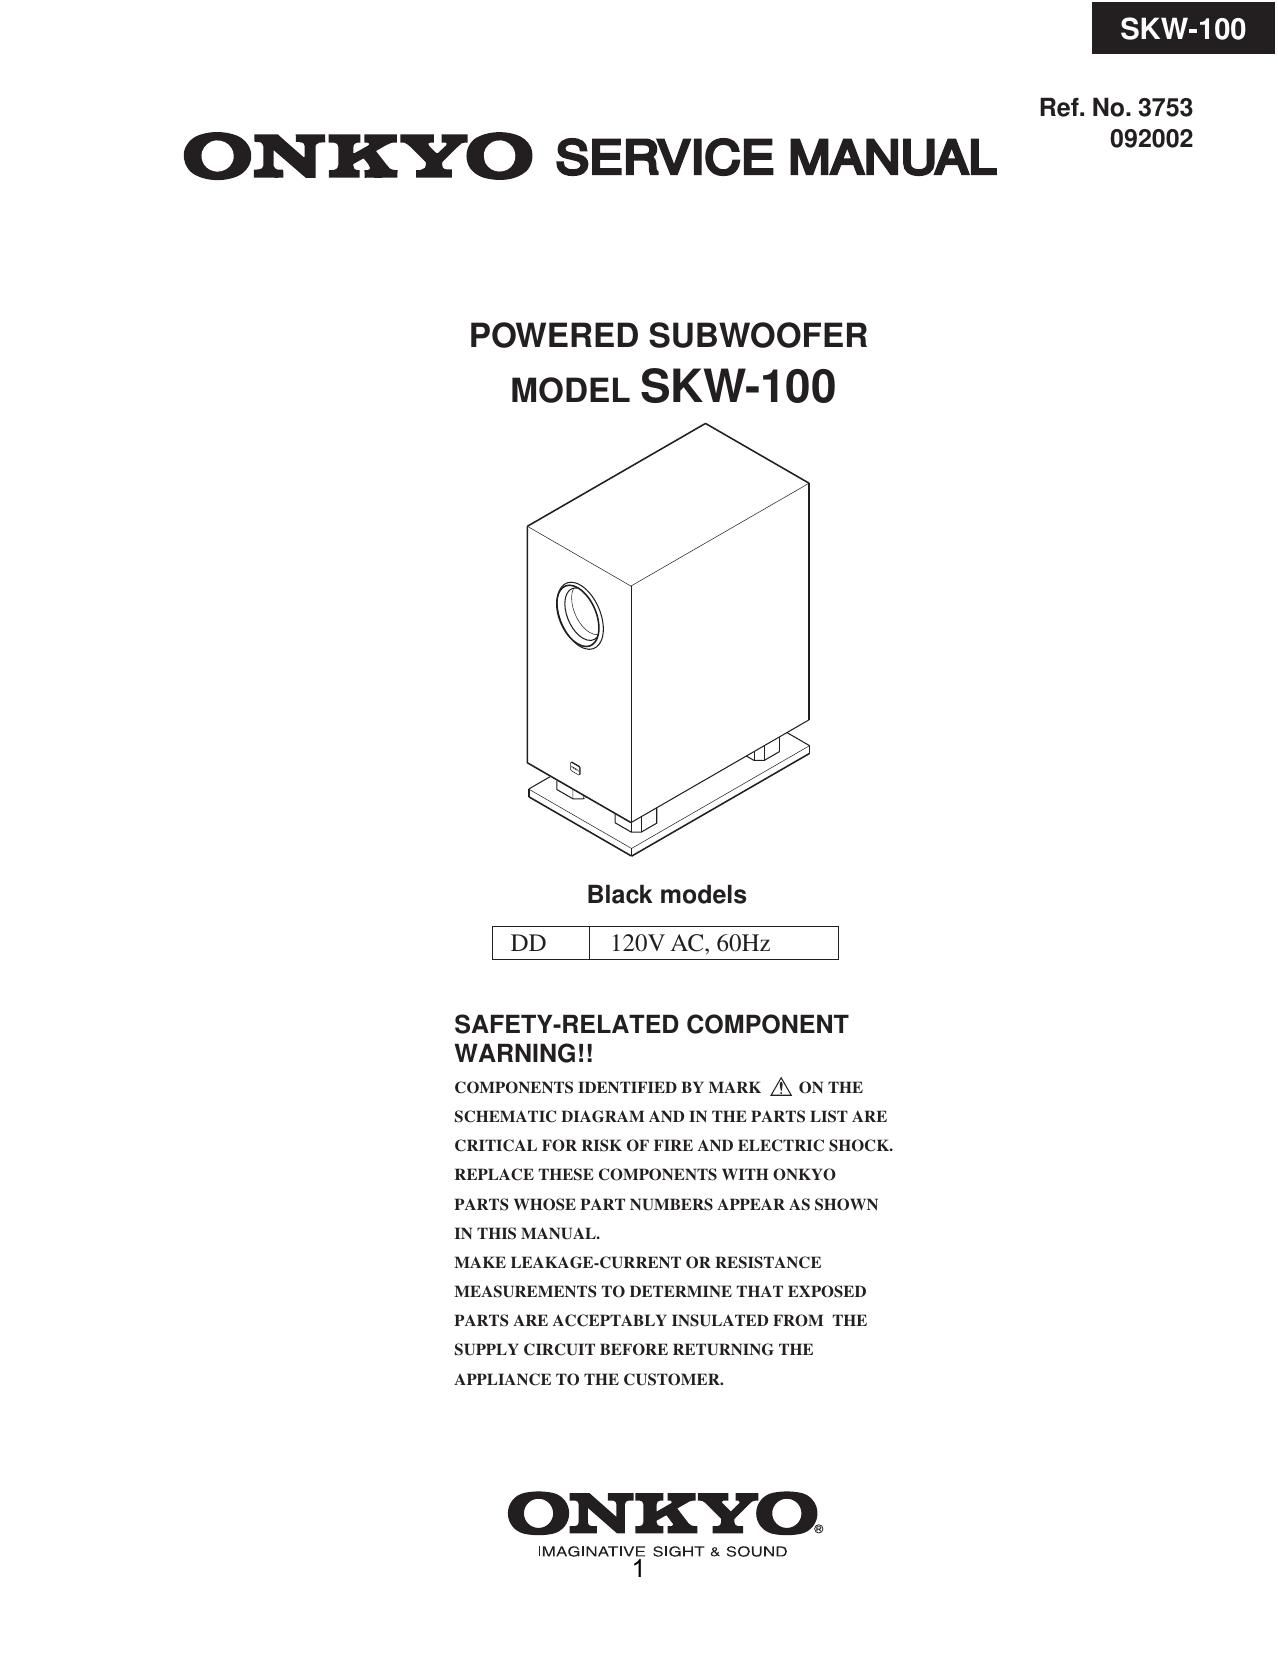 Onkyo SKW 100 Service Manual